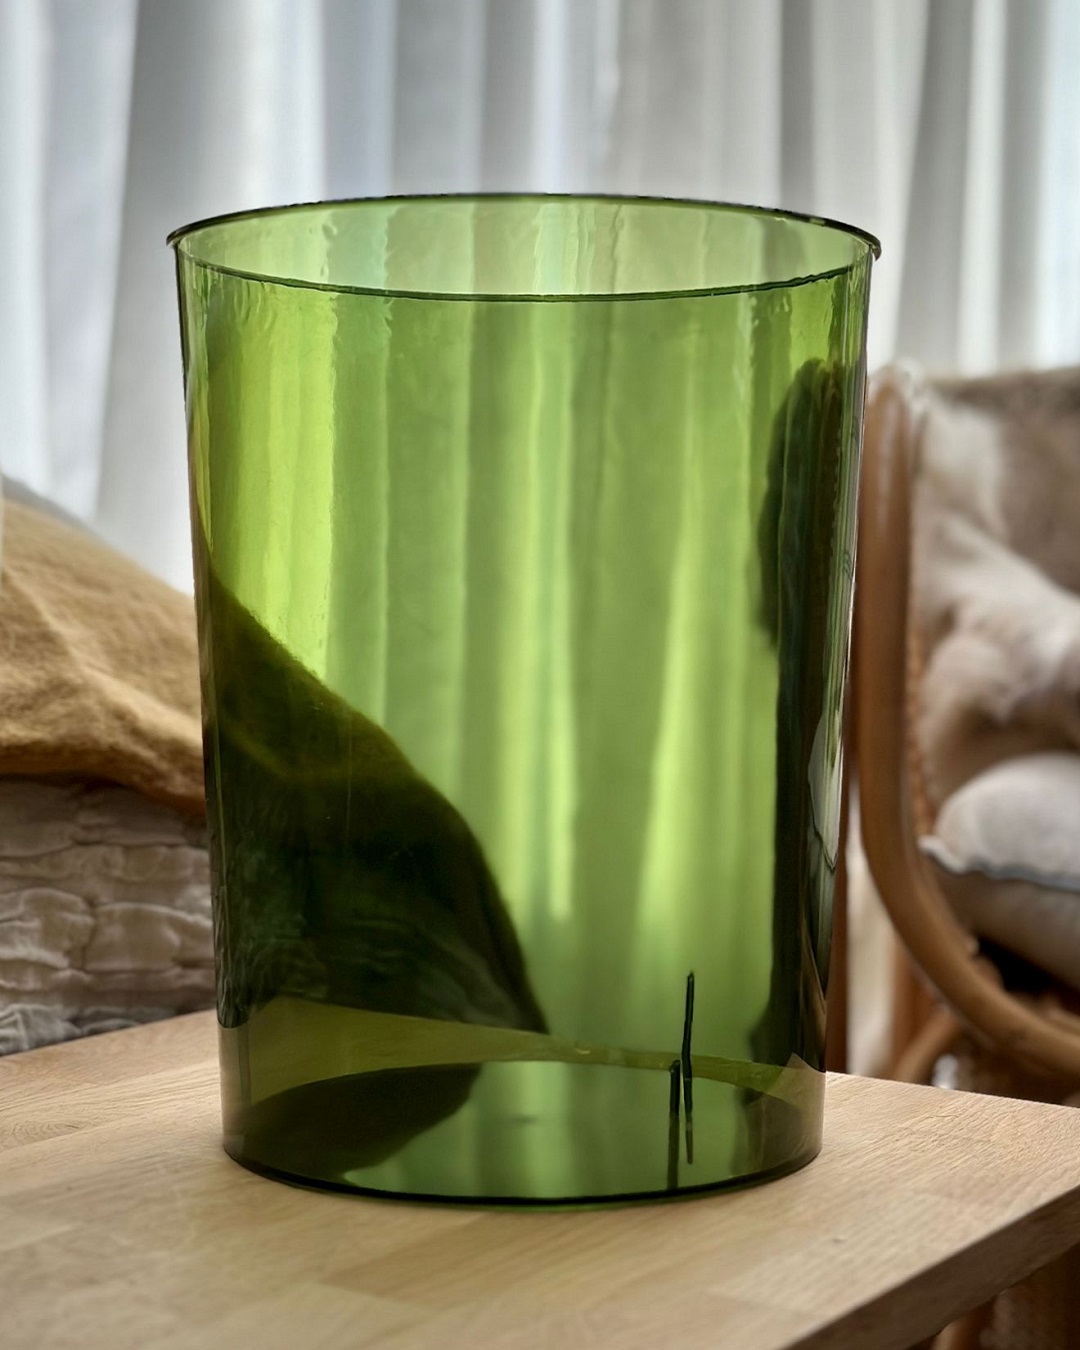 Transparent green cylinder rubbish bin on table